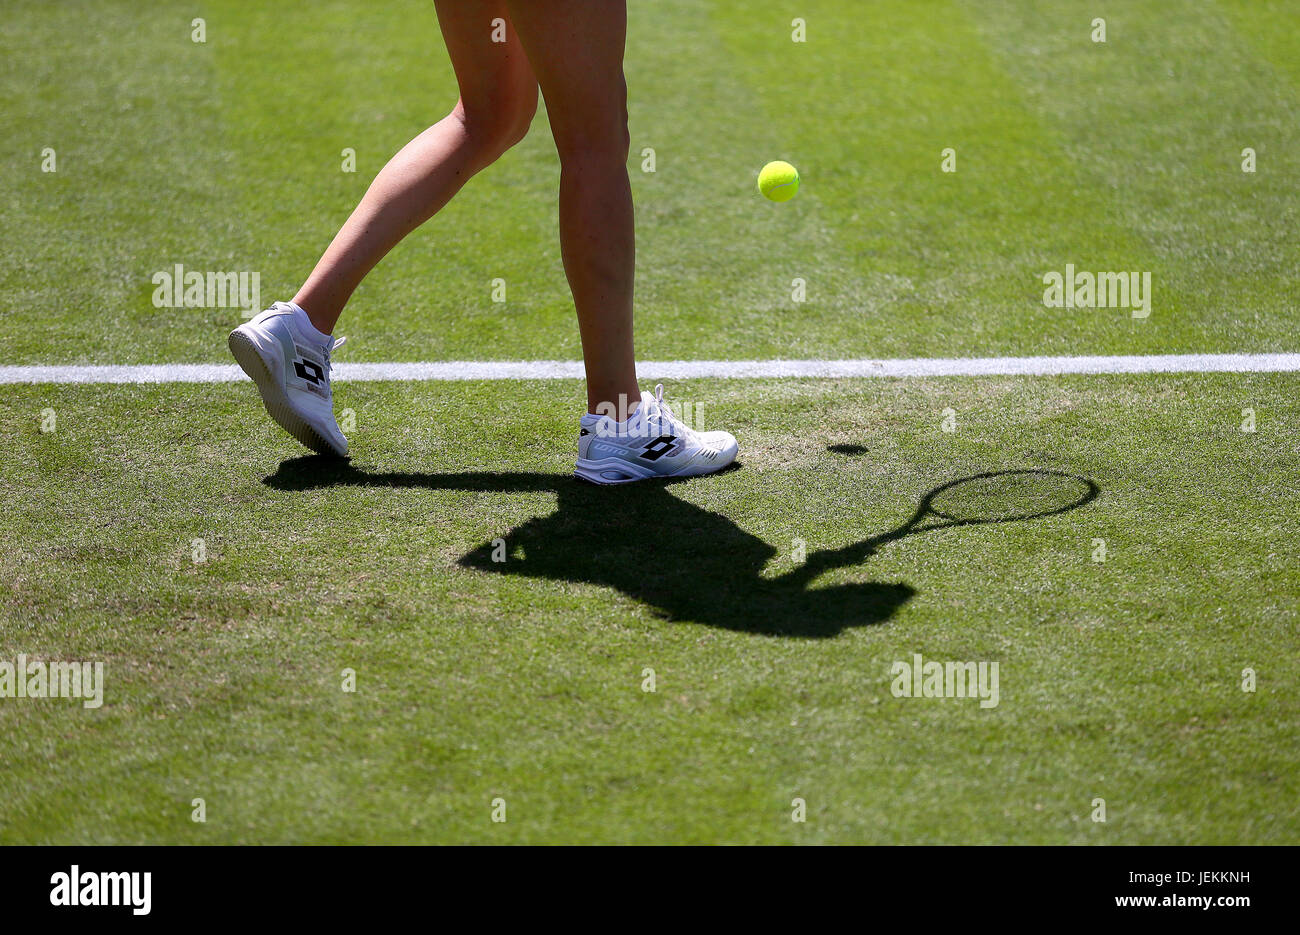 Detail view of Great Britain's Naomi Broady's legs and shoes alongside her shadow during her match against Czech Republic's Kristyna Pliskova during day four of the AEGON International at Devonshire Park, Eastbourne. PRESS ASSOCIATION Photo. Picture date: Monday June 26, 2017. See PA story TENNIS Eastbourne. Photo credit should read: Gareth Fuller/PA Wire. . Stock Photo